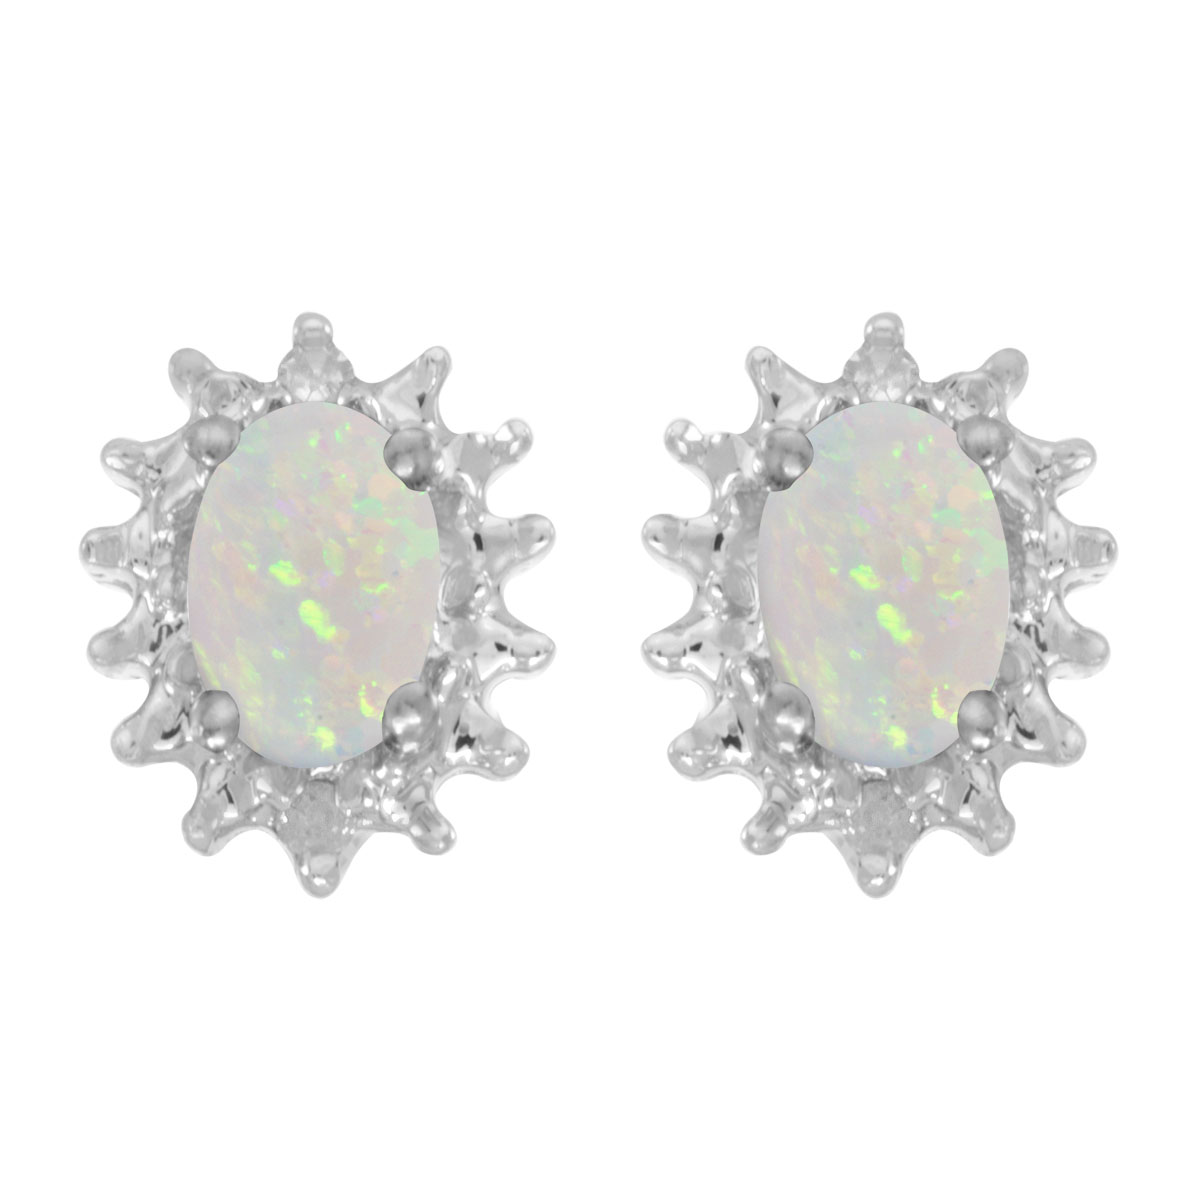 These 14k white gold oval opal and diamond earrings feature 6x4 mm genuine natural opals with a 0.38 ct total weight and .04 ct diamonds.